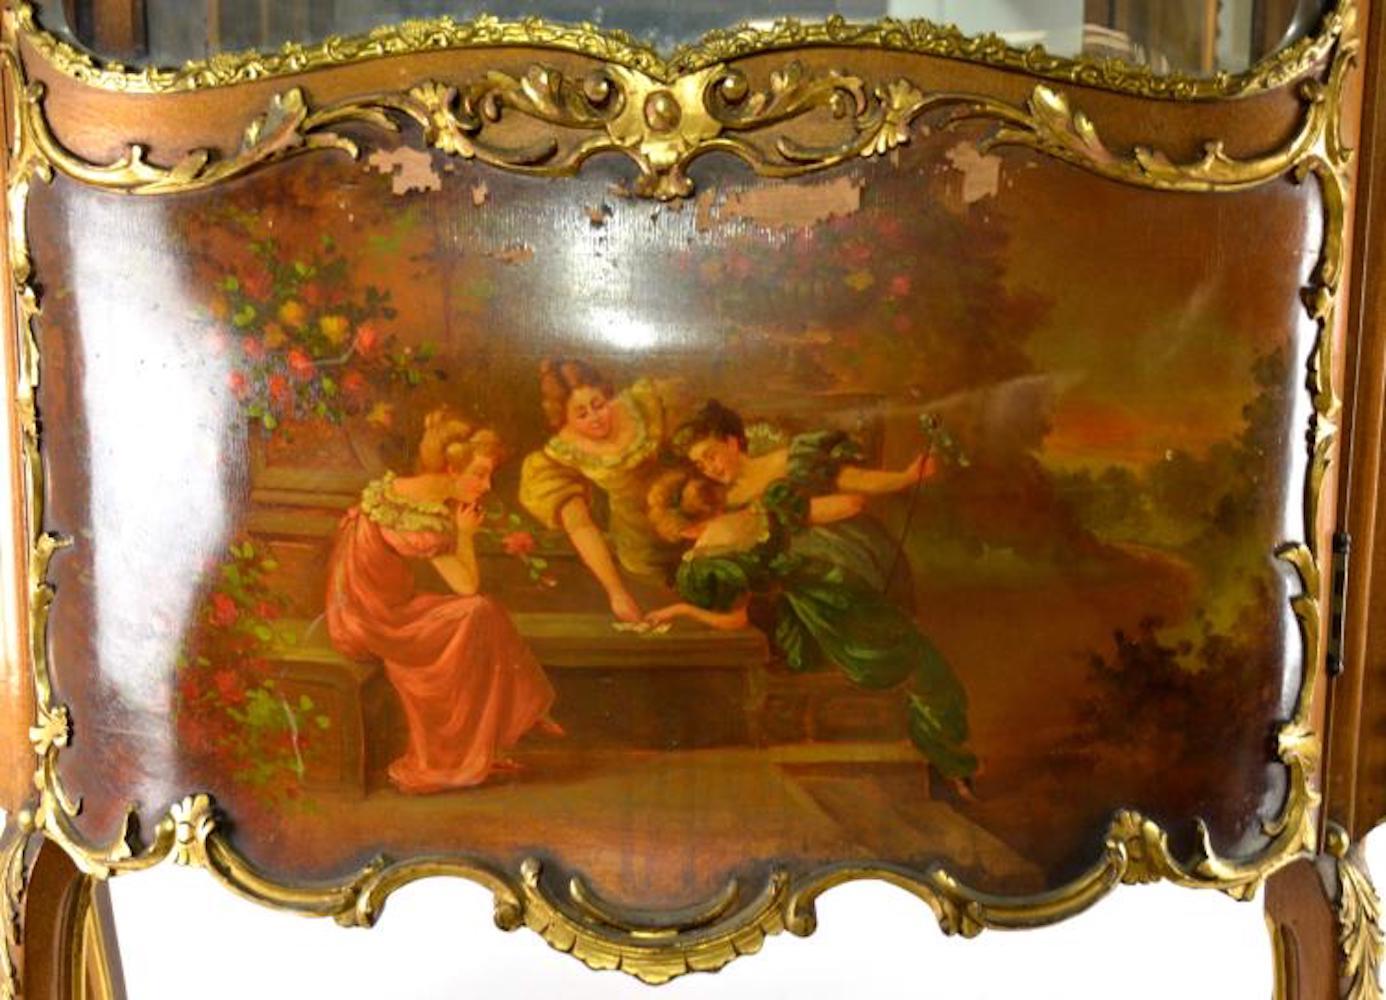 Late 19th century; 76.5 inches height x 37 inches width x 16 inches depth; has beautiful gold gilt press, with hand painted cherubs, has gold gilt ormolu mouse throughout, mirrored back, beautiful artwork of women and gardens, overall condition is